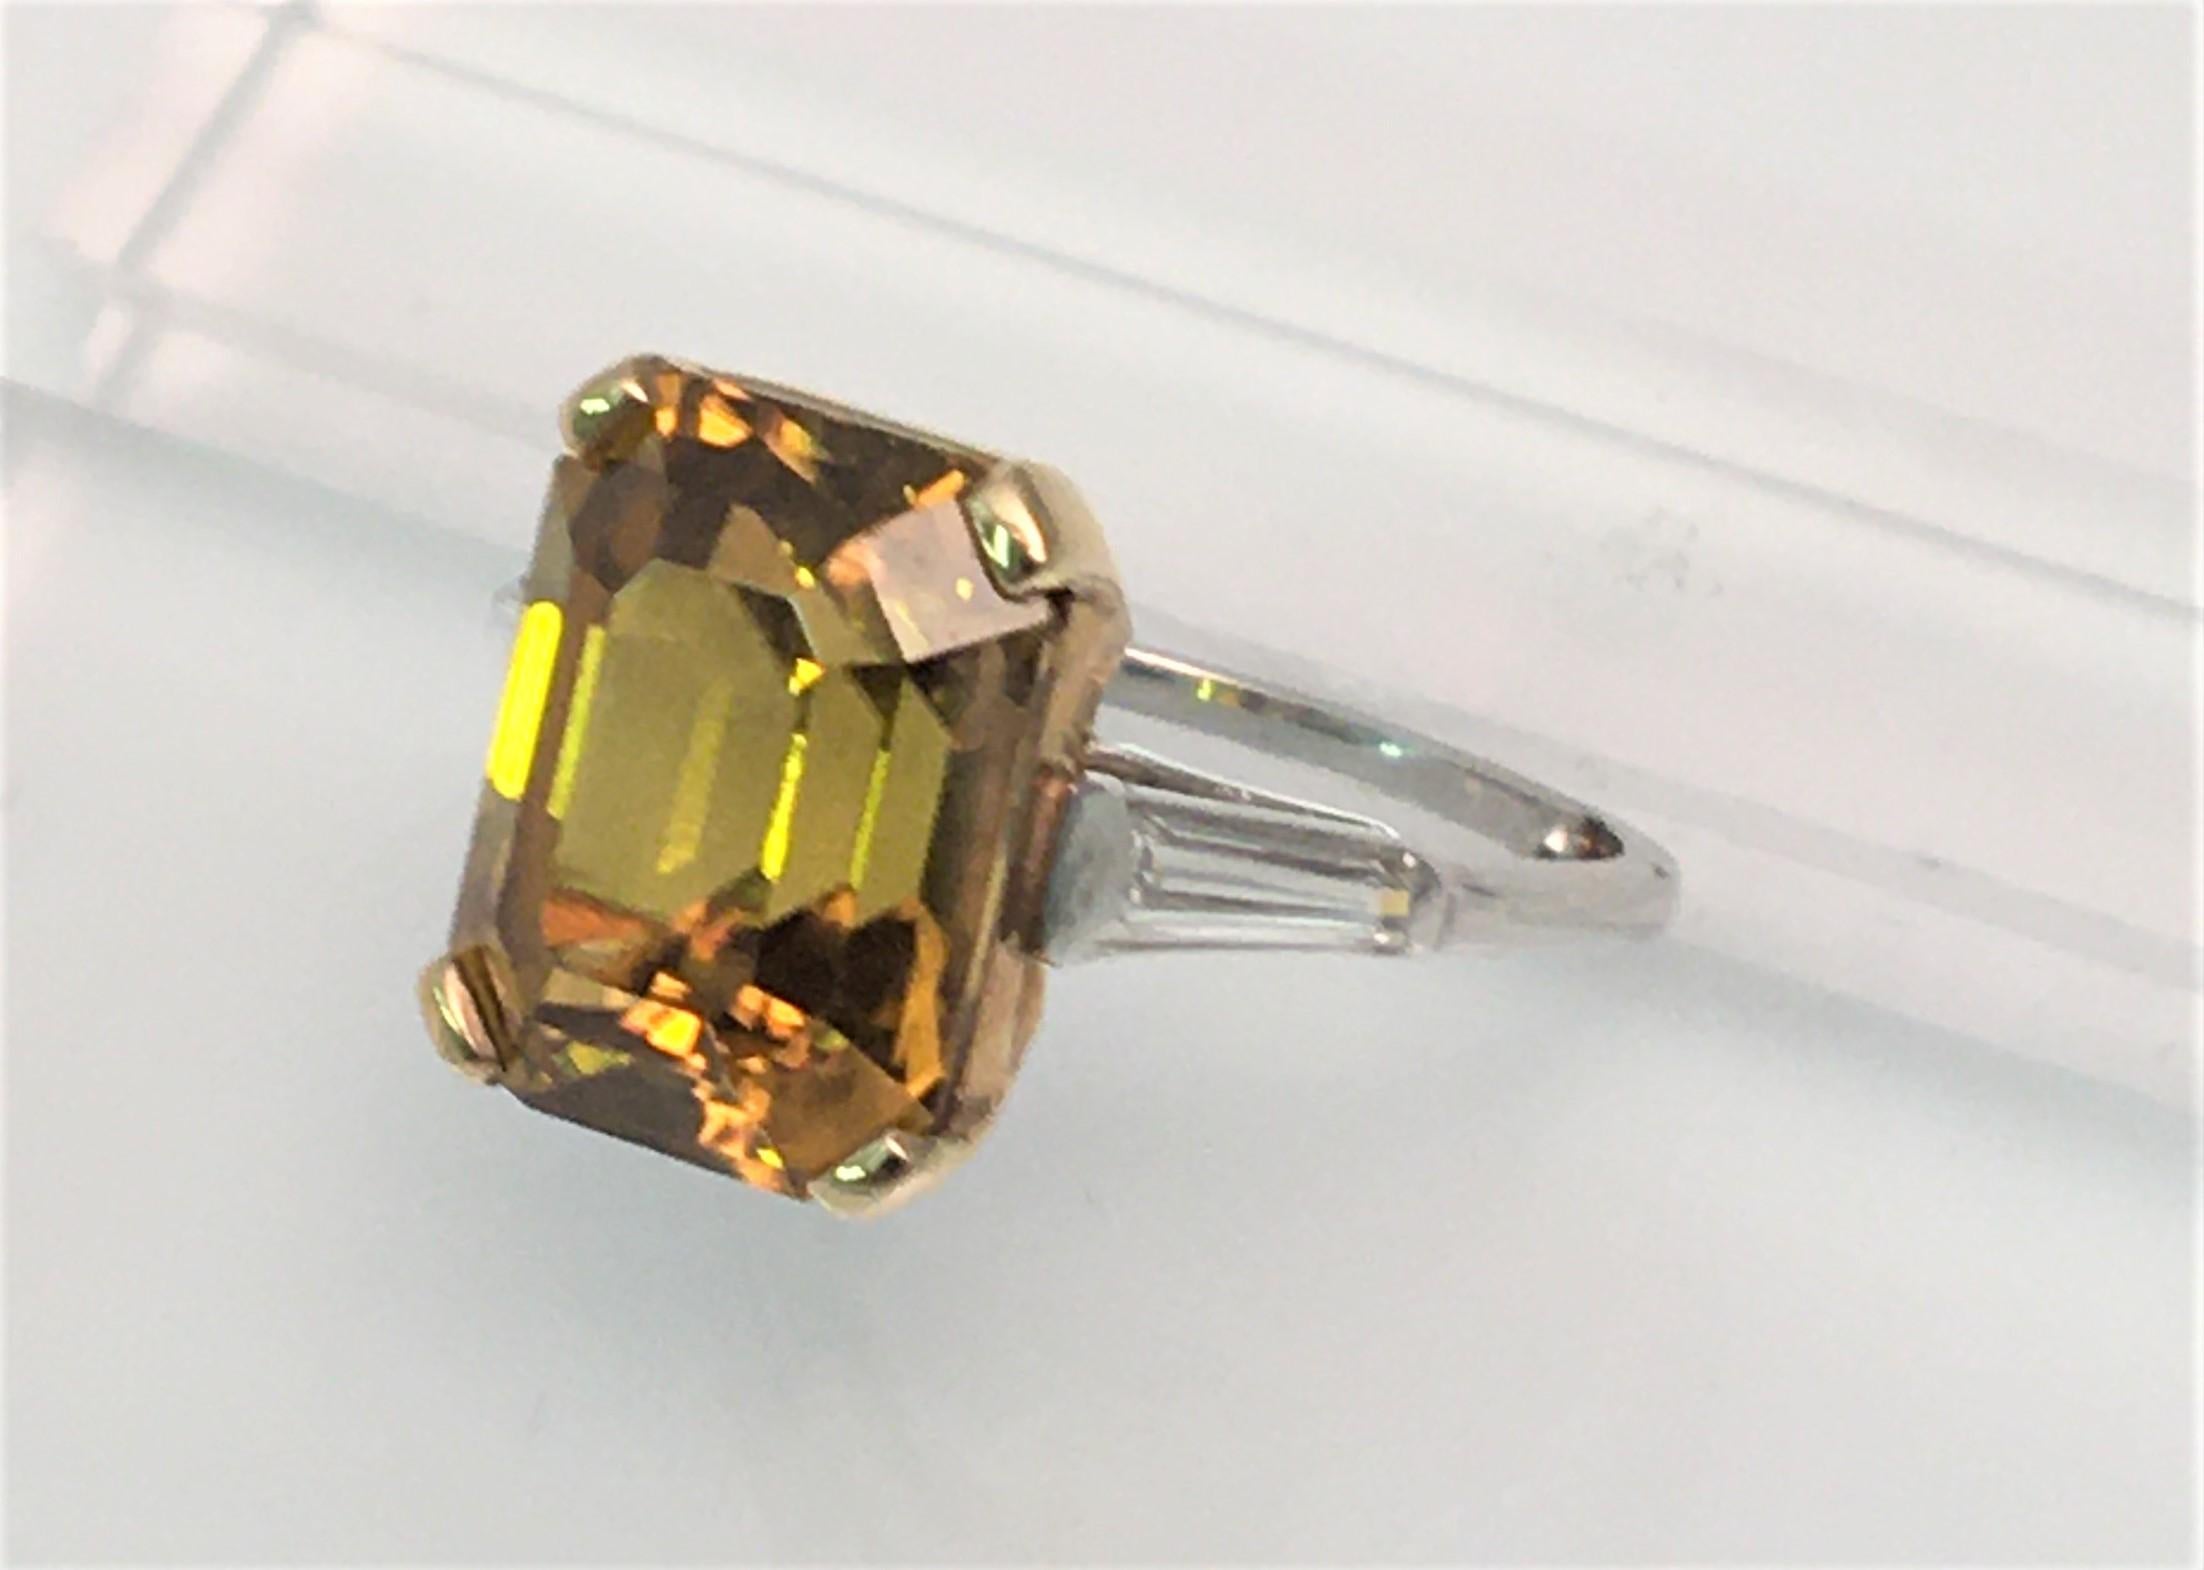 This beautiful cognac colored zircon is said to heal headaches and ground your spirit.*  

Approximately 13mm X 10mm X 6.5mm emerald cut cognac color zircon
One long, tapered baguette diamond set in platinum on each side of ring
Approximately .32